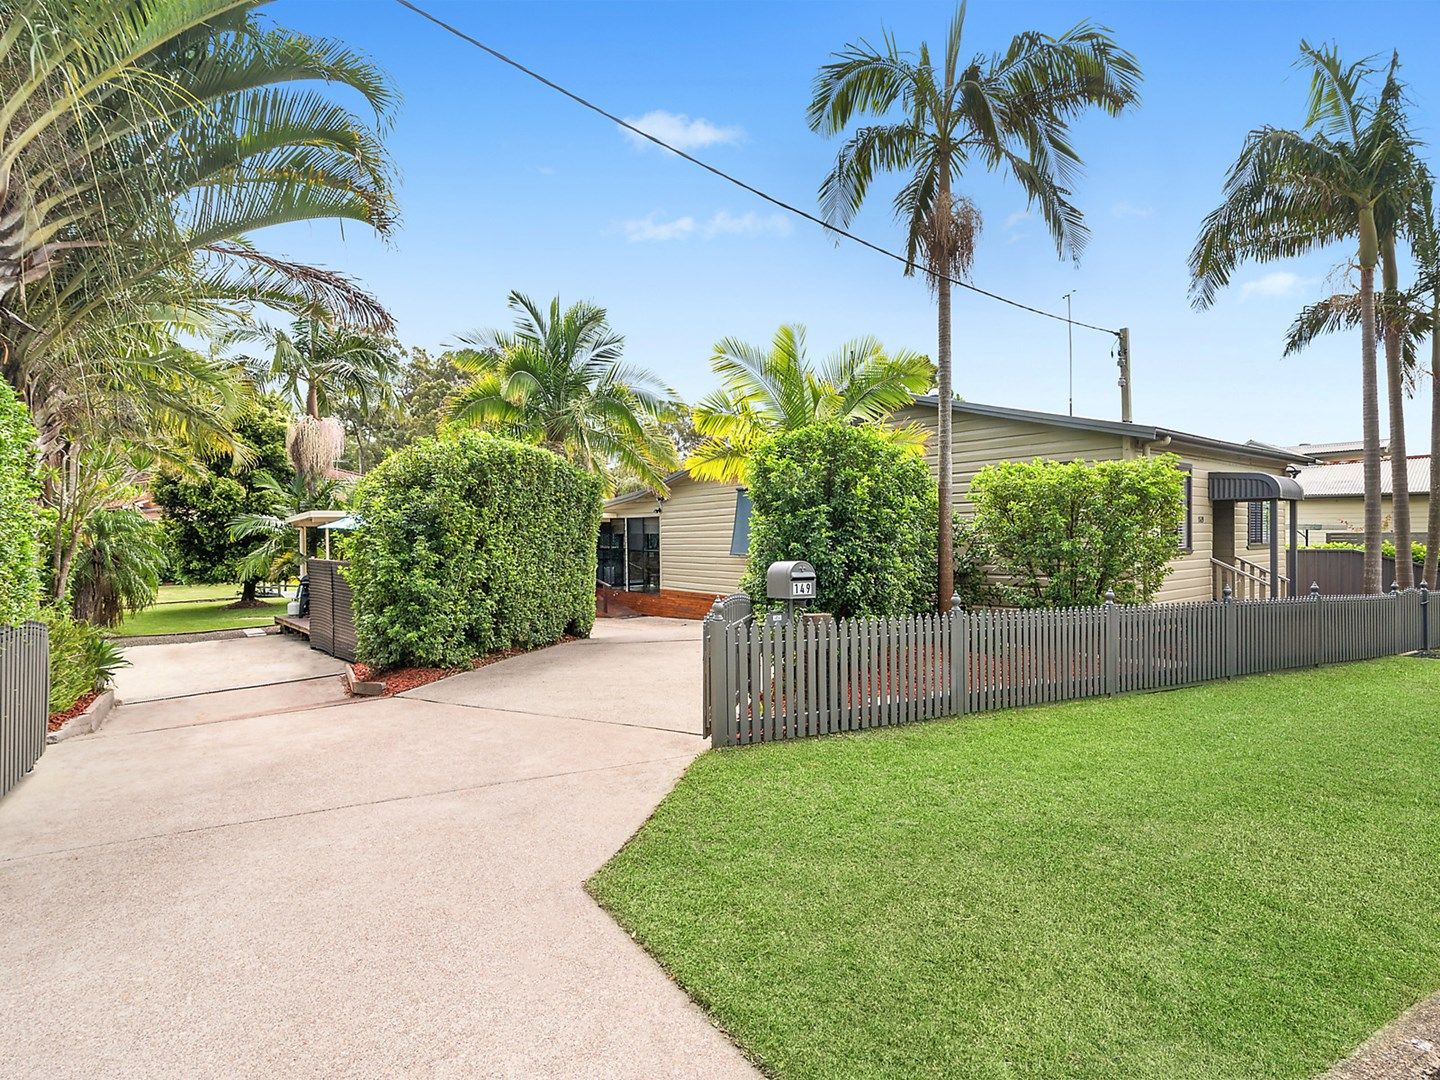 149 Marmong Street, Marmong Point NSW 2284, Image 0